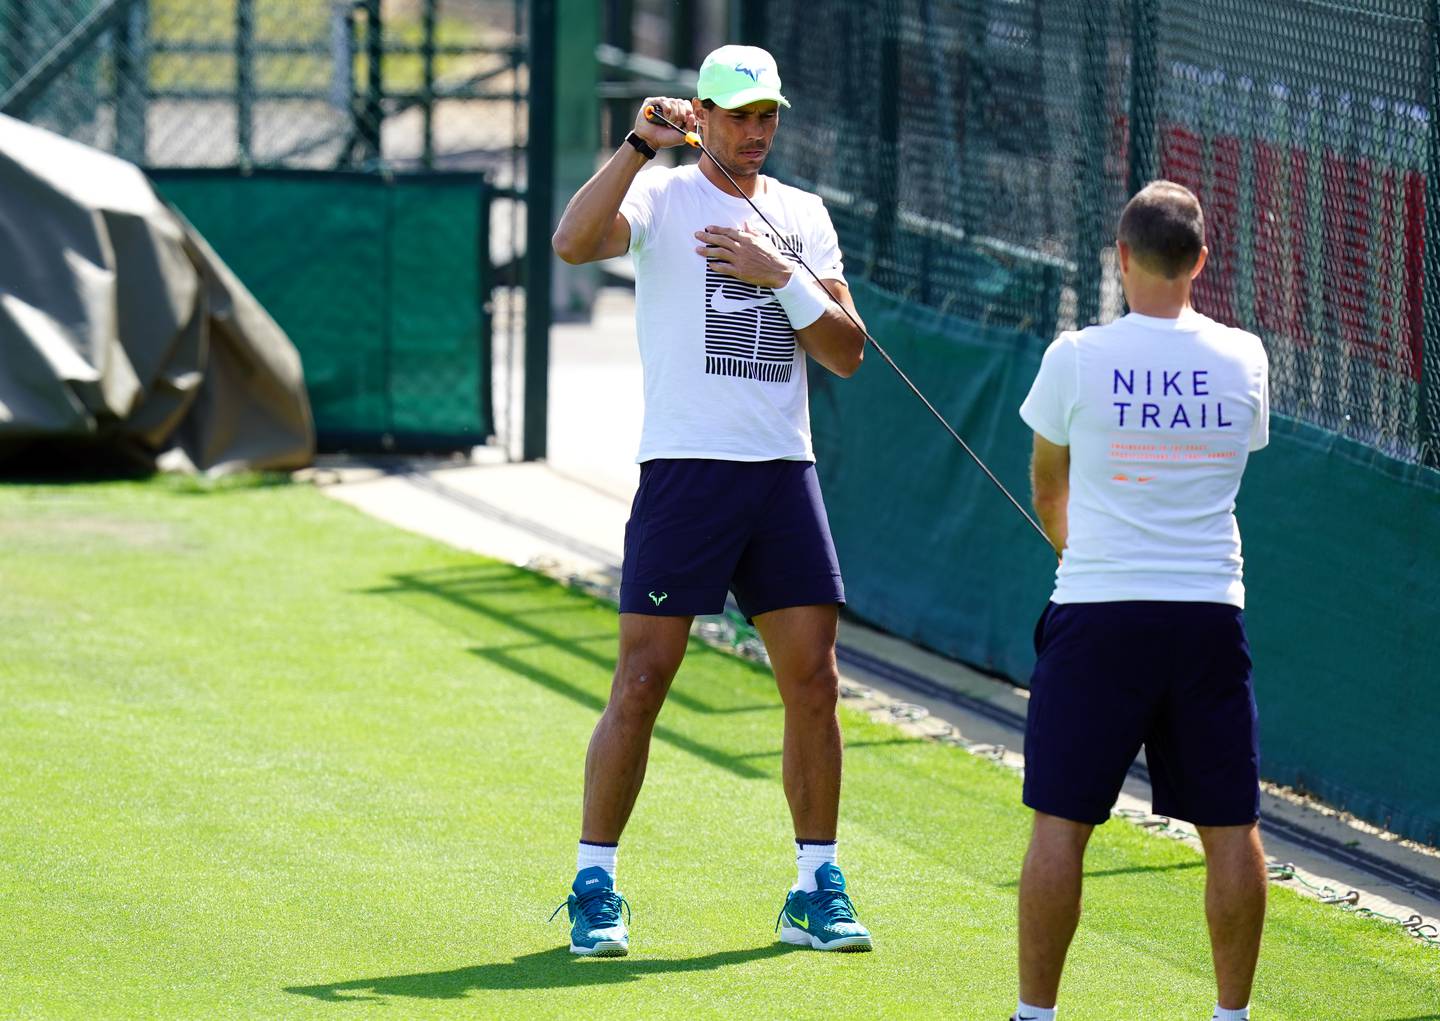 Rafael Nadal during a practice session on Tuesday, June 21, 2022. PA